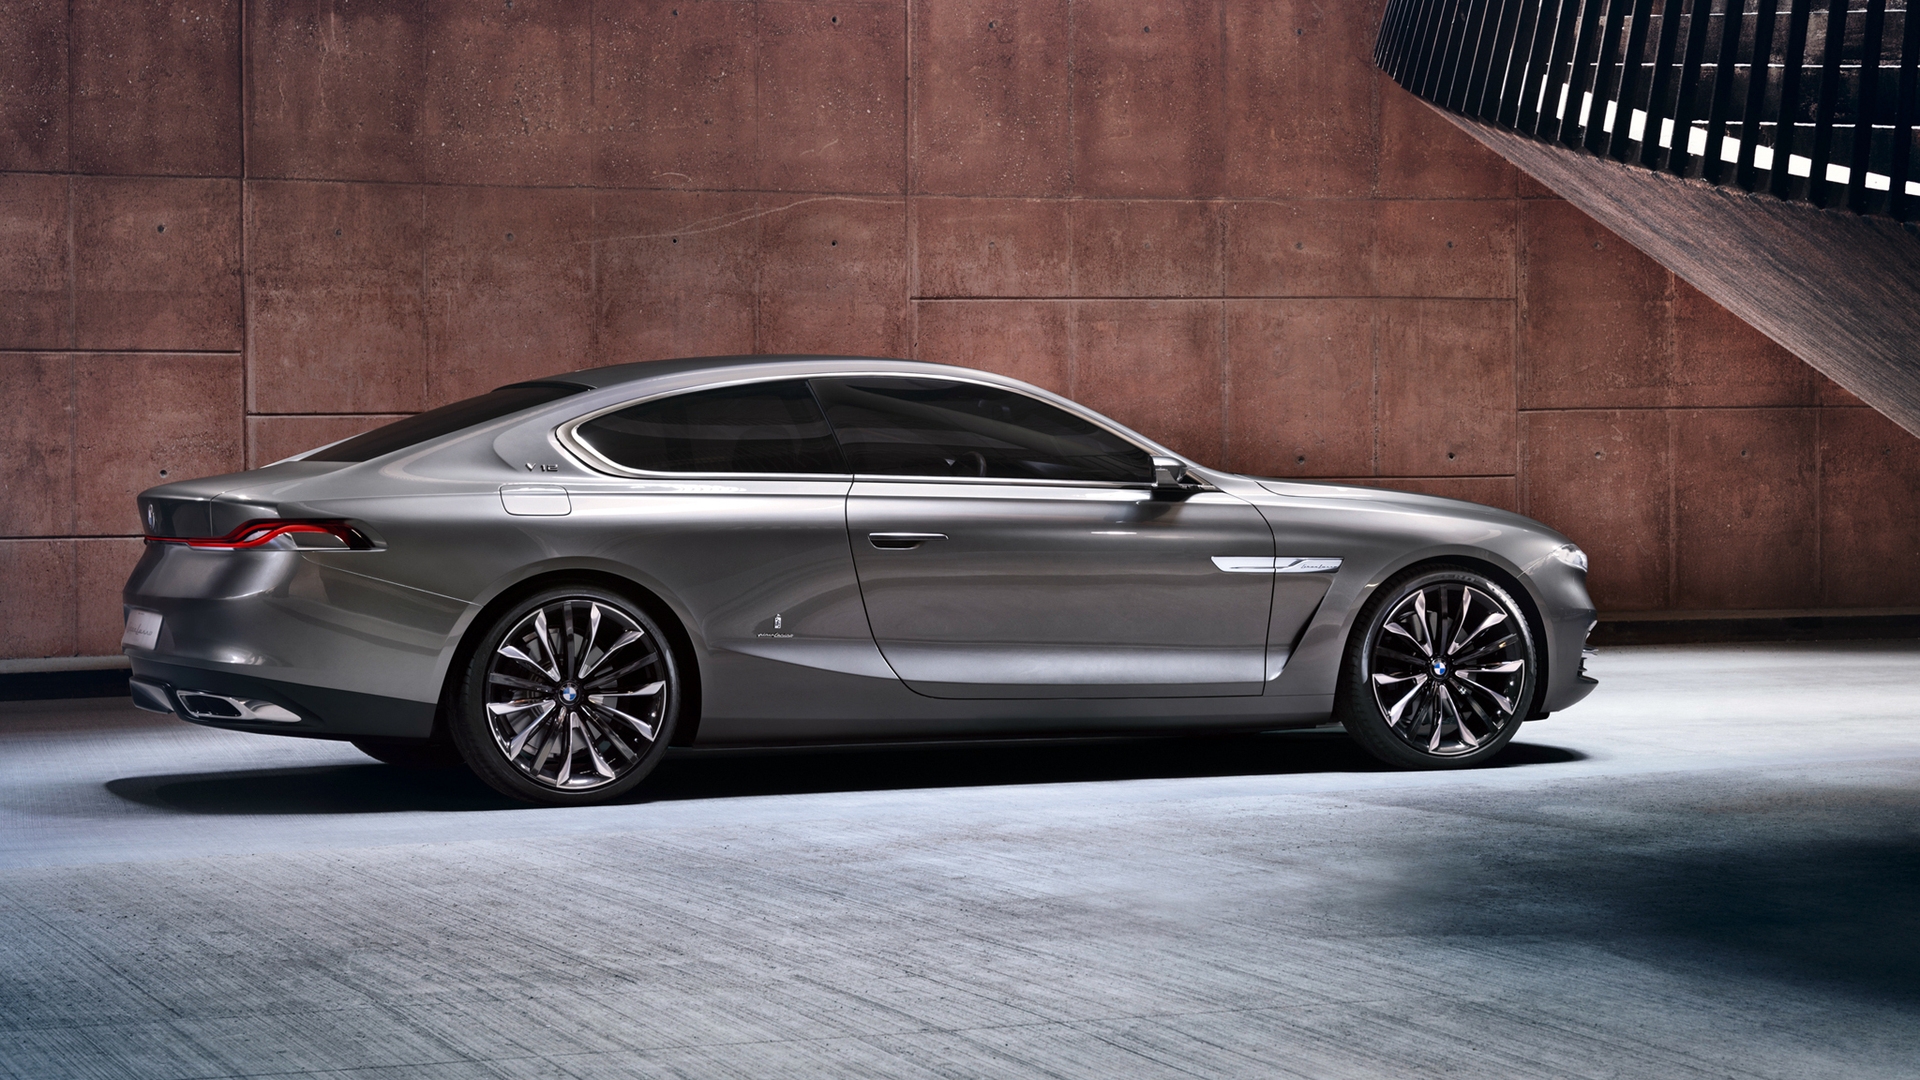 BMW Gran Lusso Coupe 2013 for 1920 x 1080 HDTV 1080p resolution